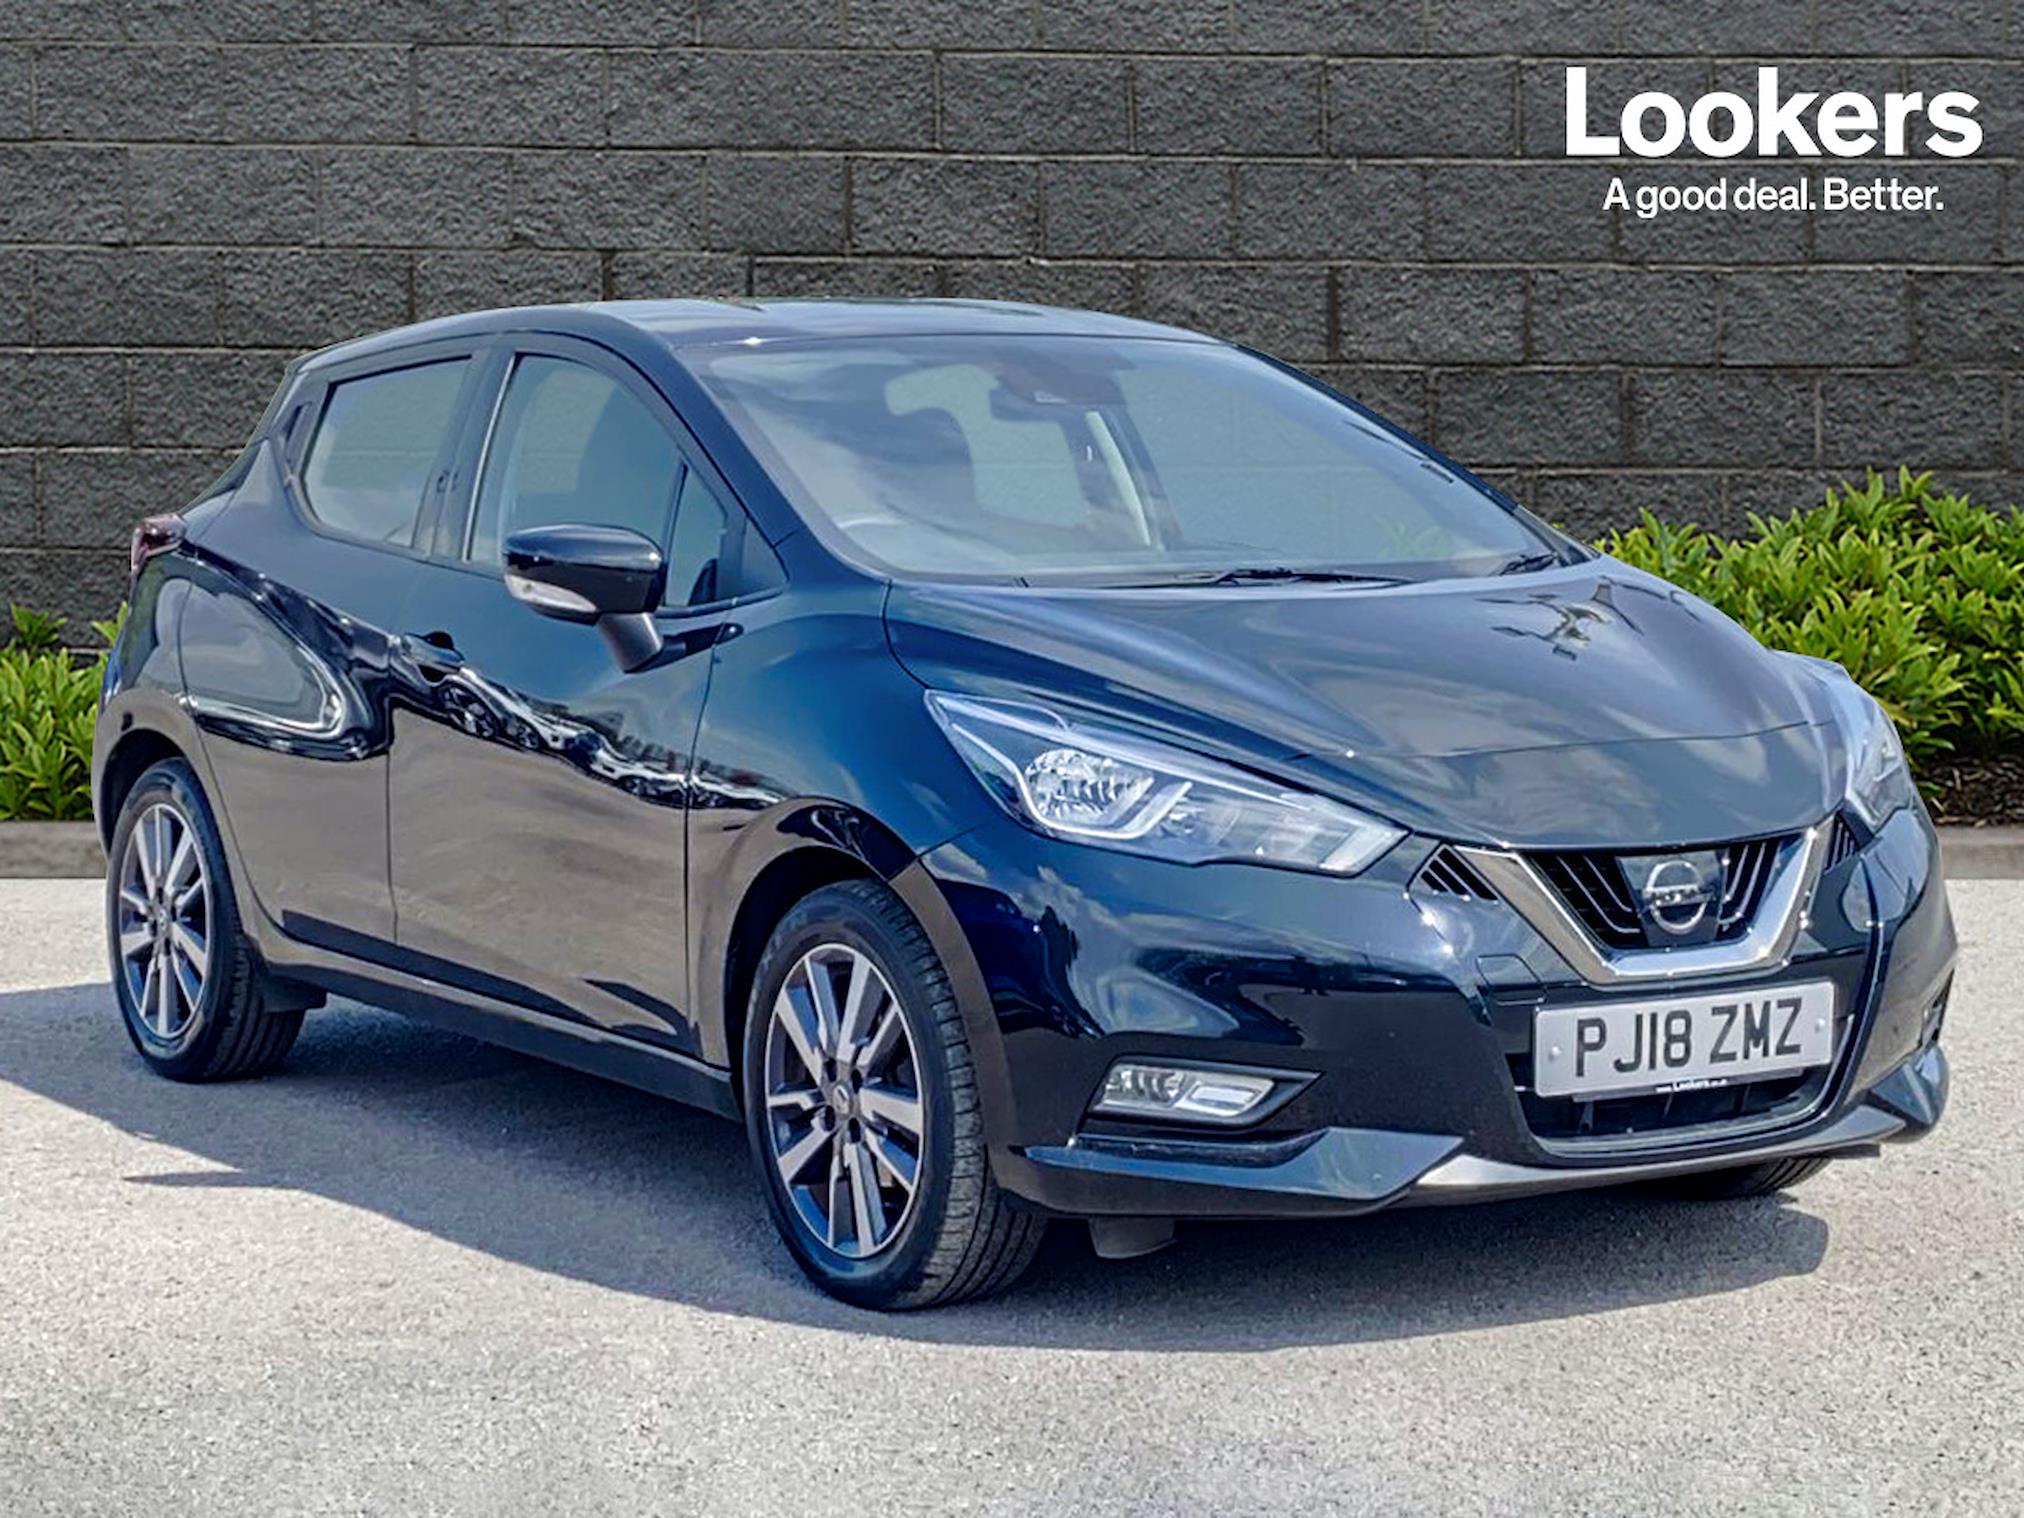 Used NISSAN MICRA 1.0 Acenta 5Dr 2018